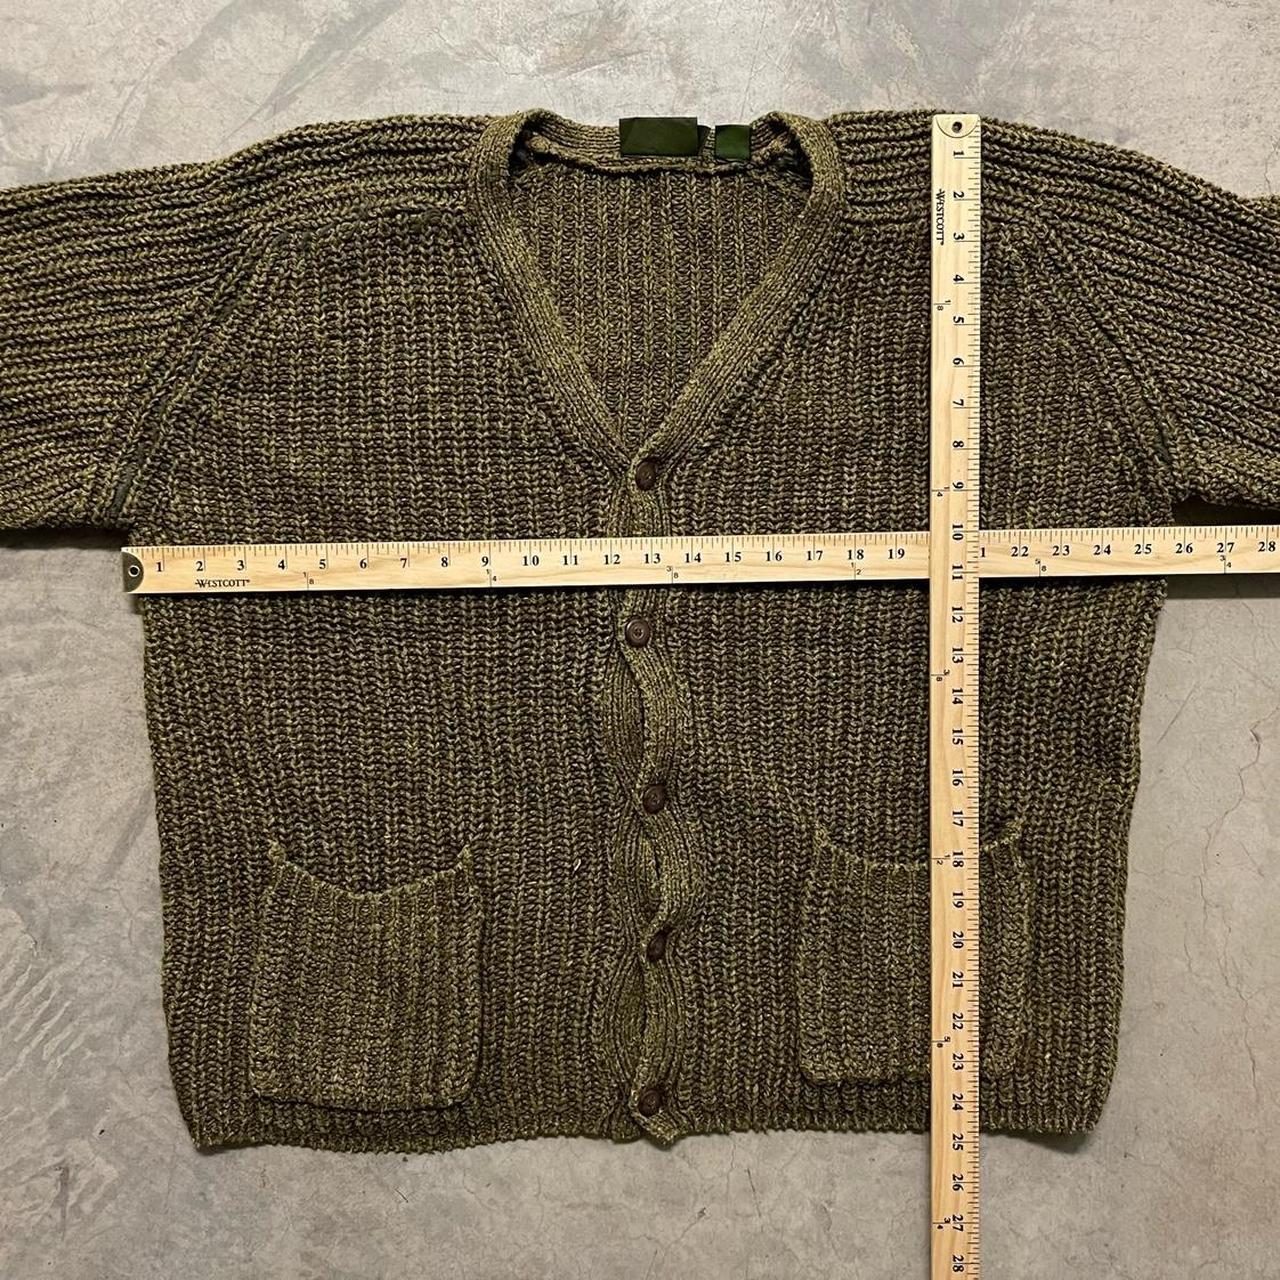 Product Image 3 - vintage timberland knitted cardigan sweater

mens